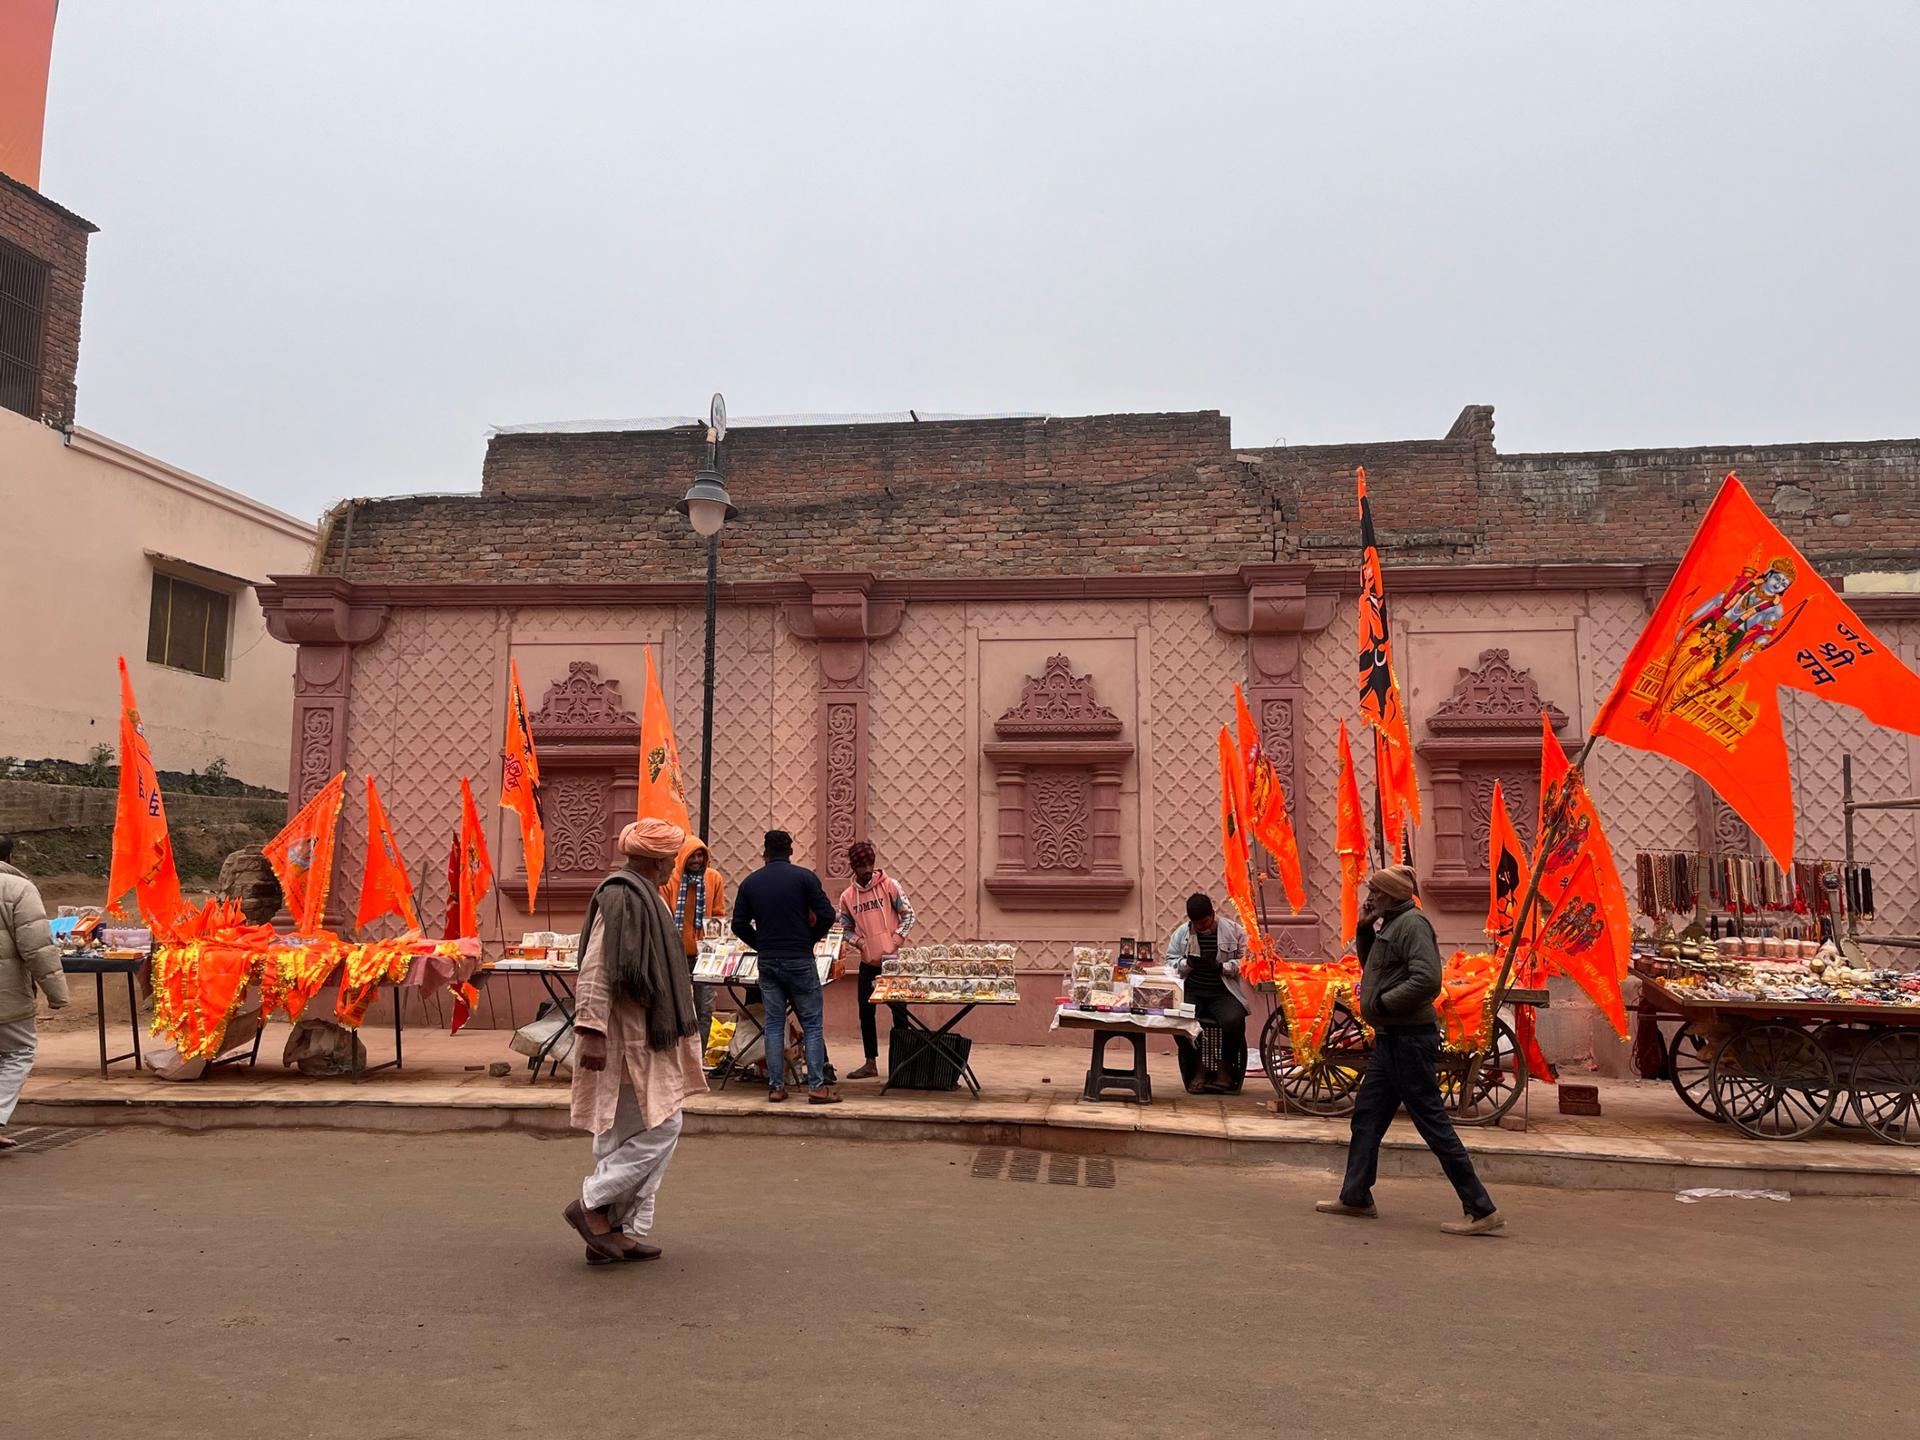 Hindu pilgrims walk on a newly-constructed boulevard in Ayodhya, northern India, that leads to a grand temple dedicated to the Hindu god Ram.